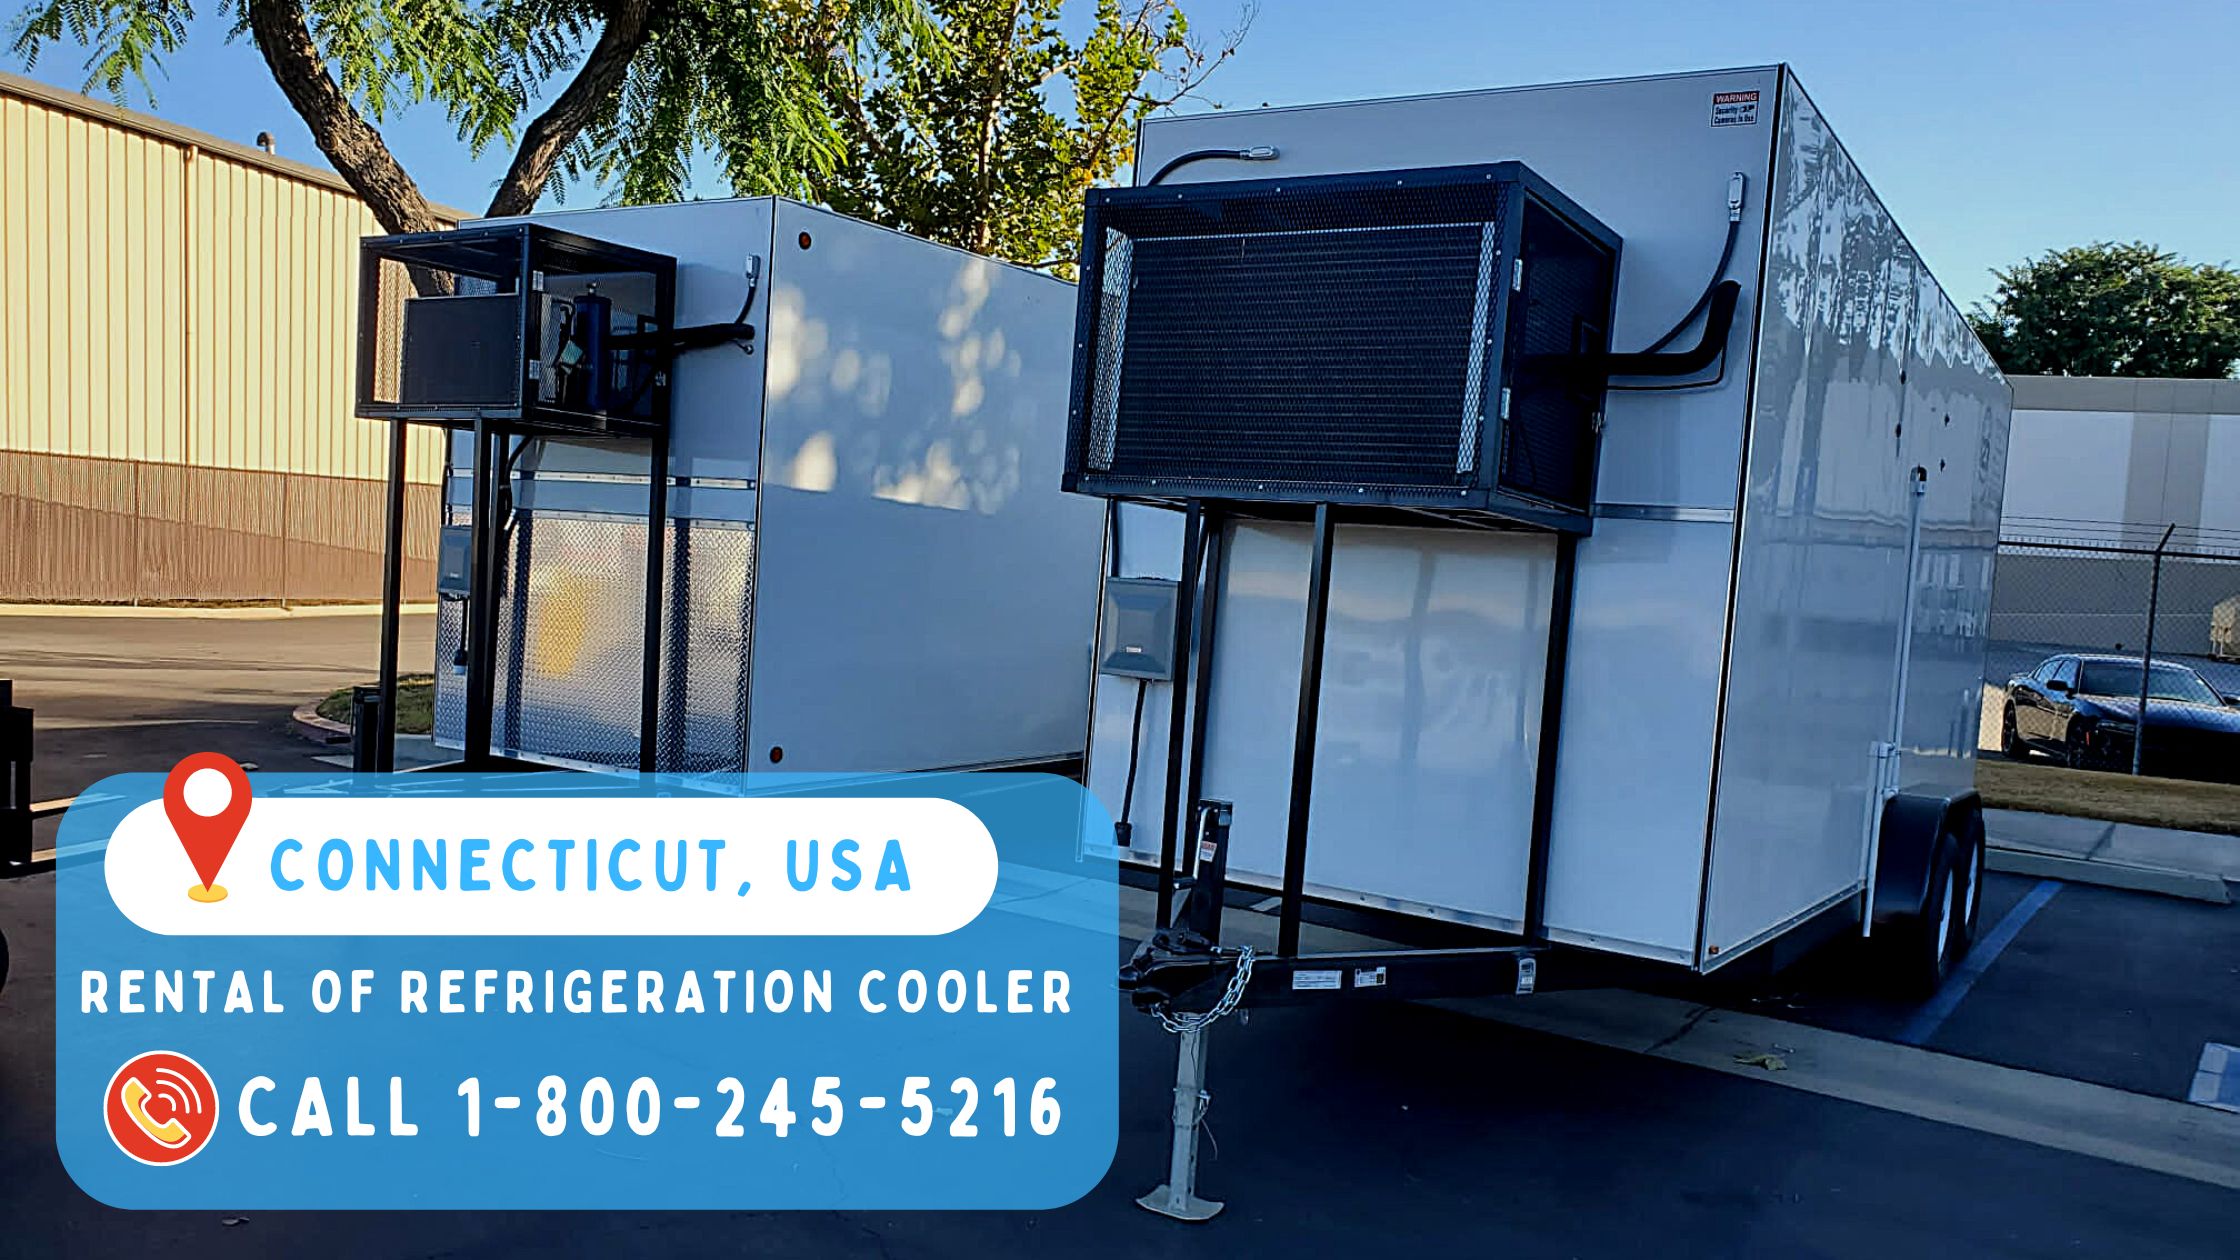 Rental of Refrigeration Cooler in Connecticut